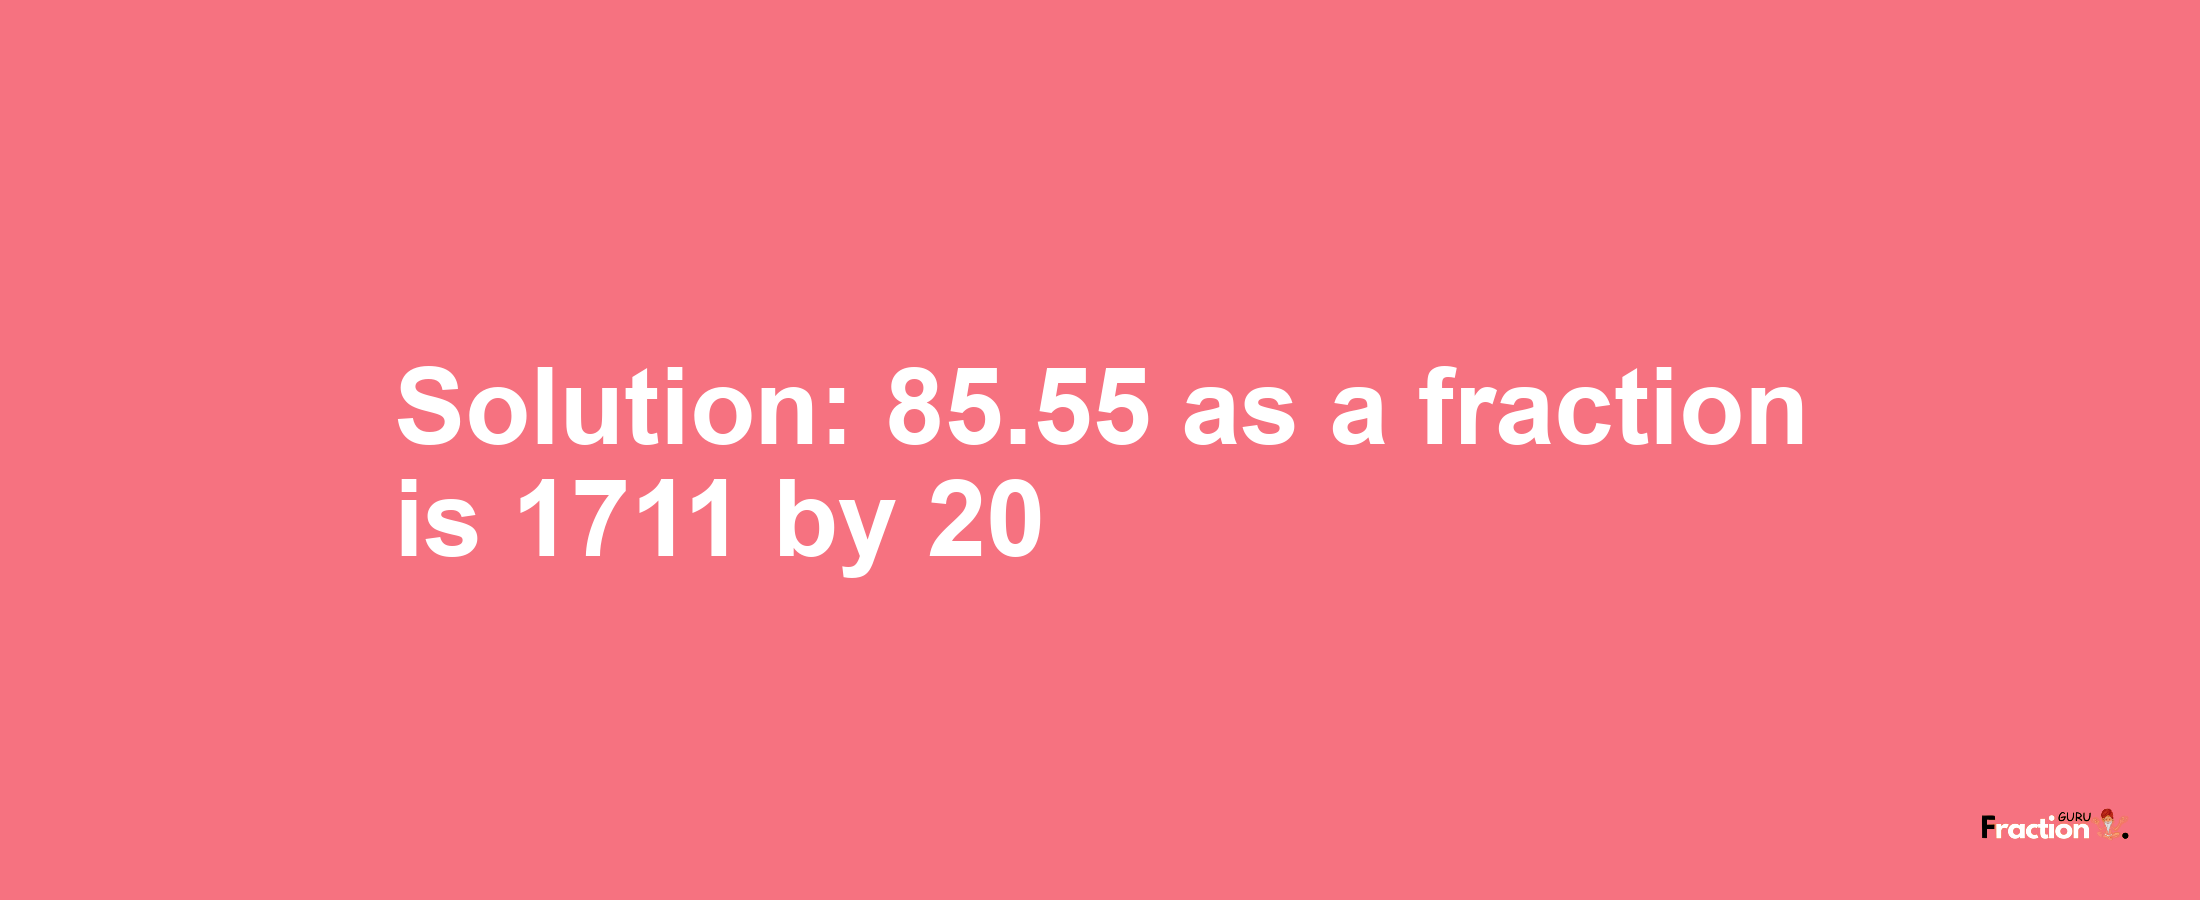 Solution:85.55 as a fraction is 1711/20